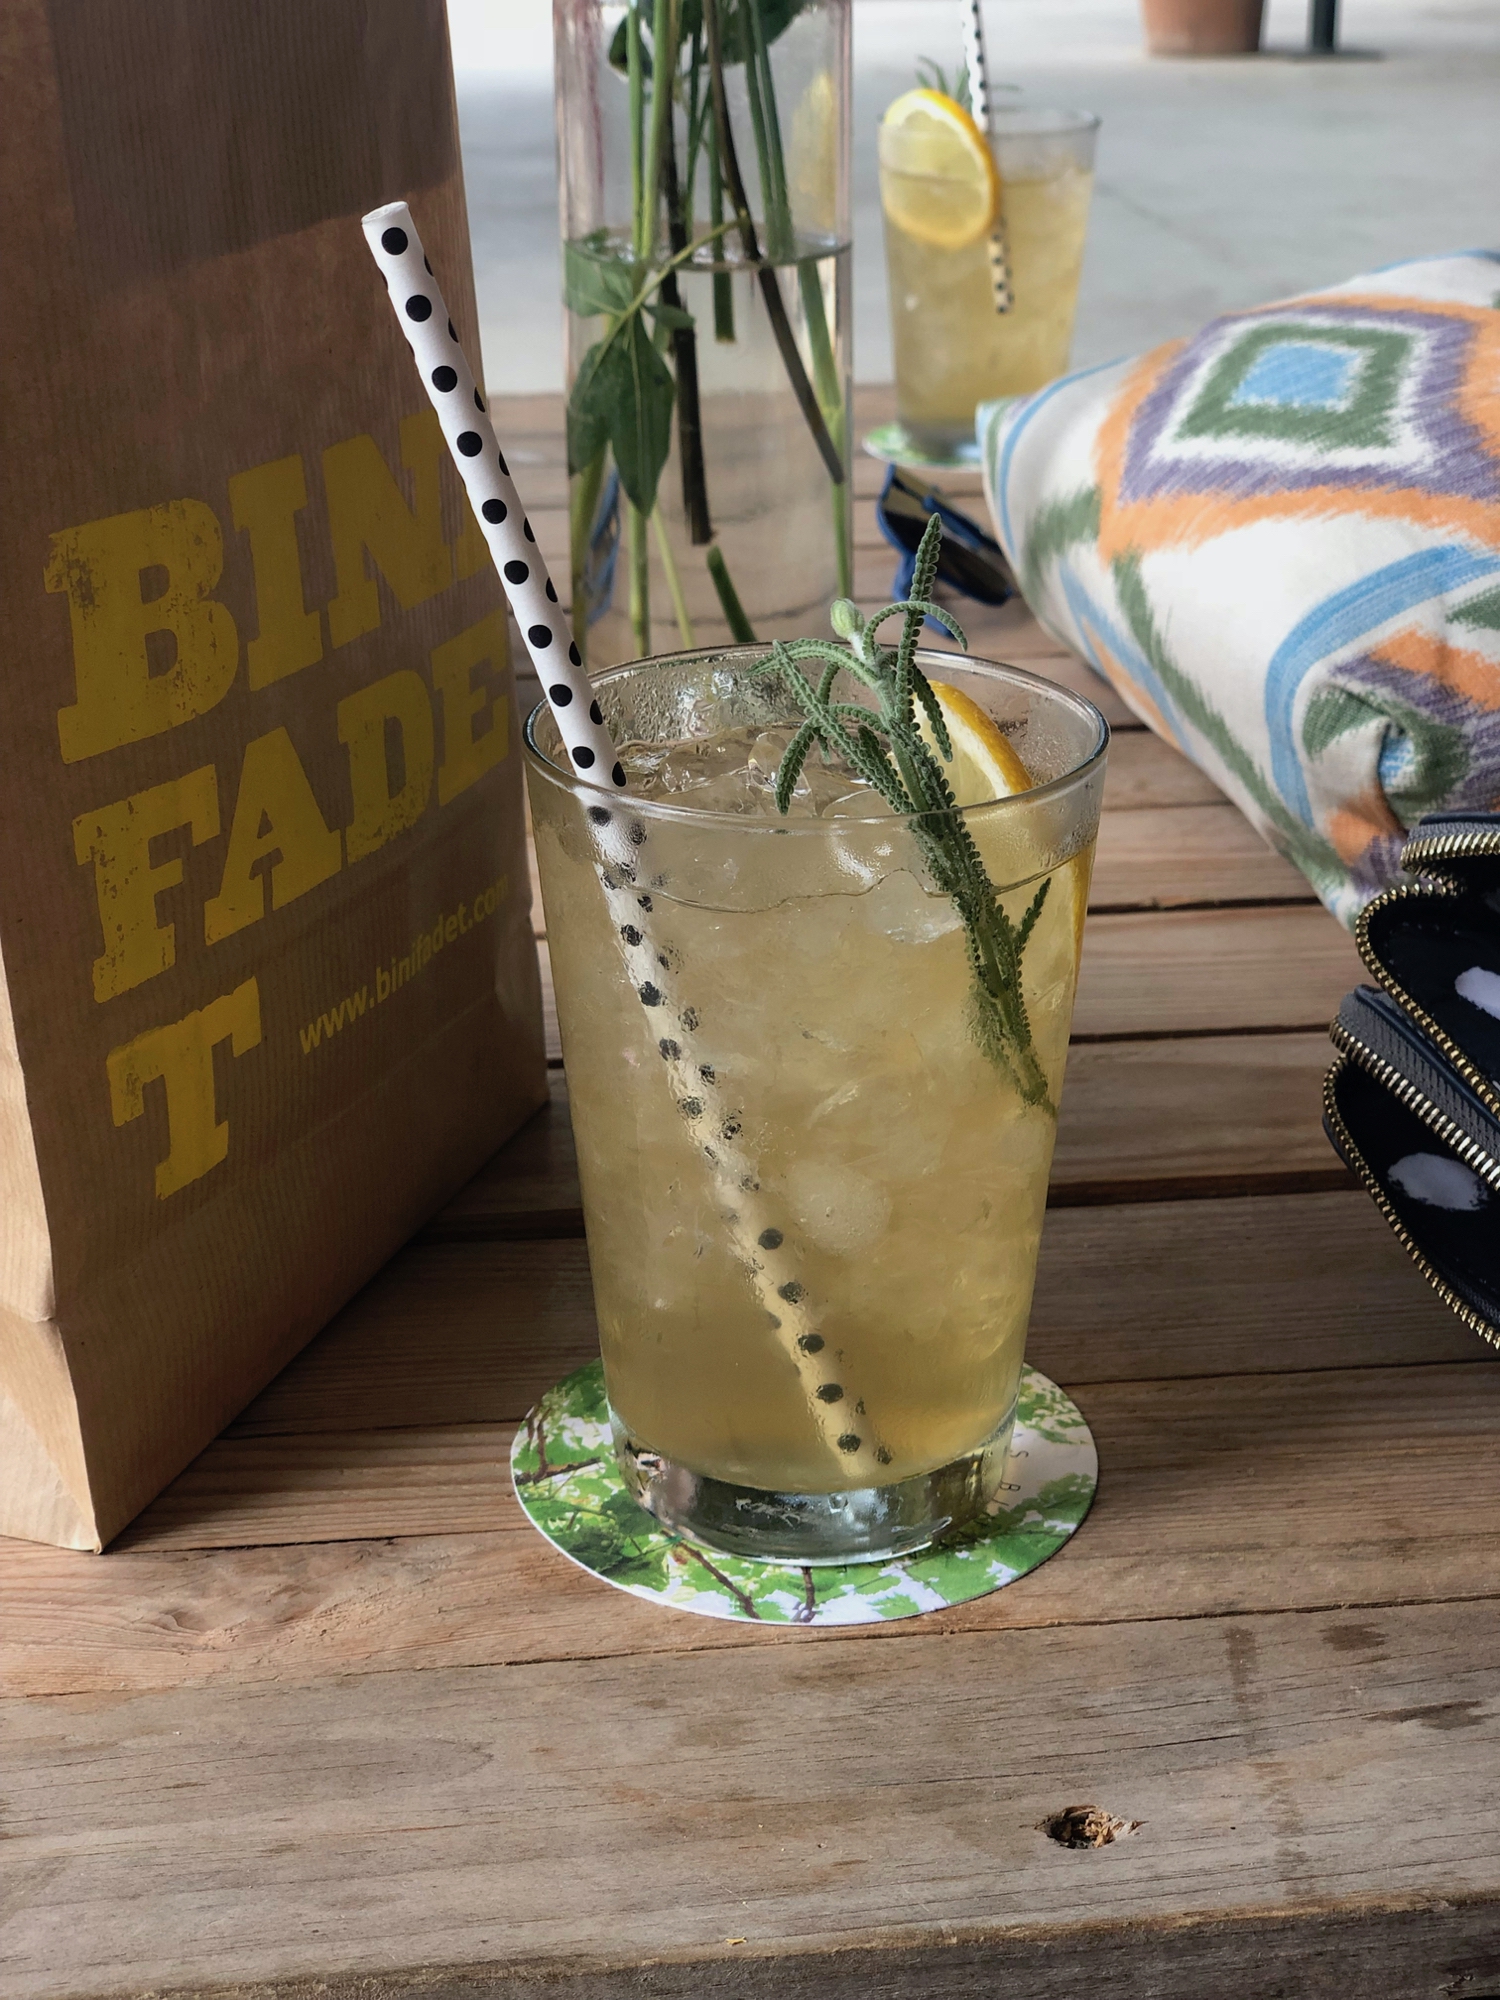 A paper bag with ‘Binifadet’ printed on the side, accompanied by fancy yellow Lavendar Lemonade drink.